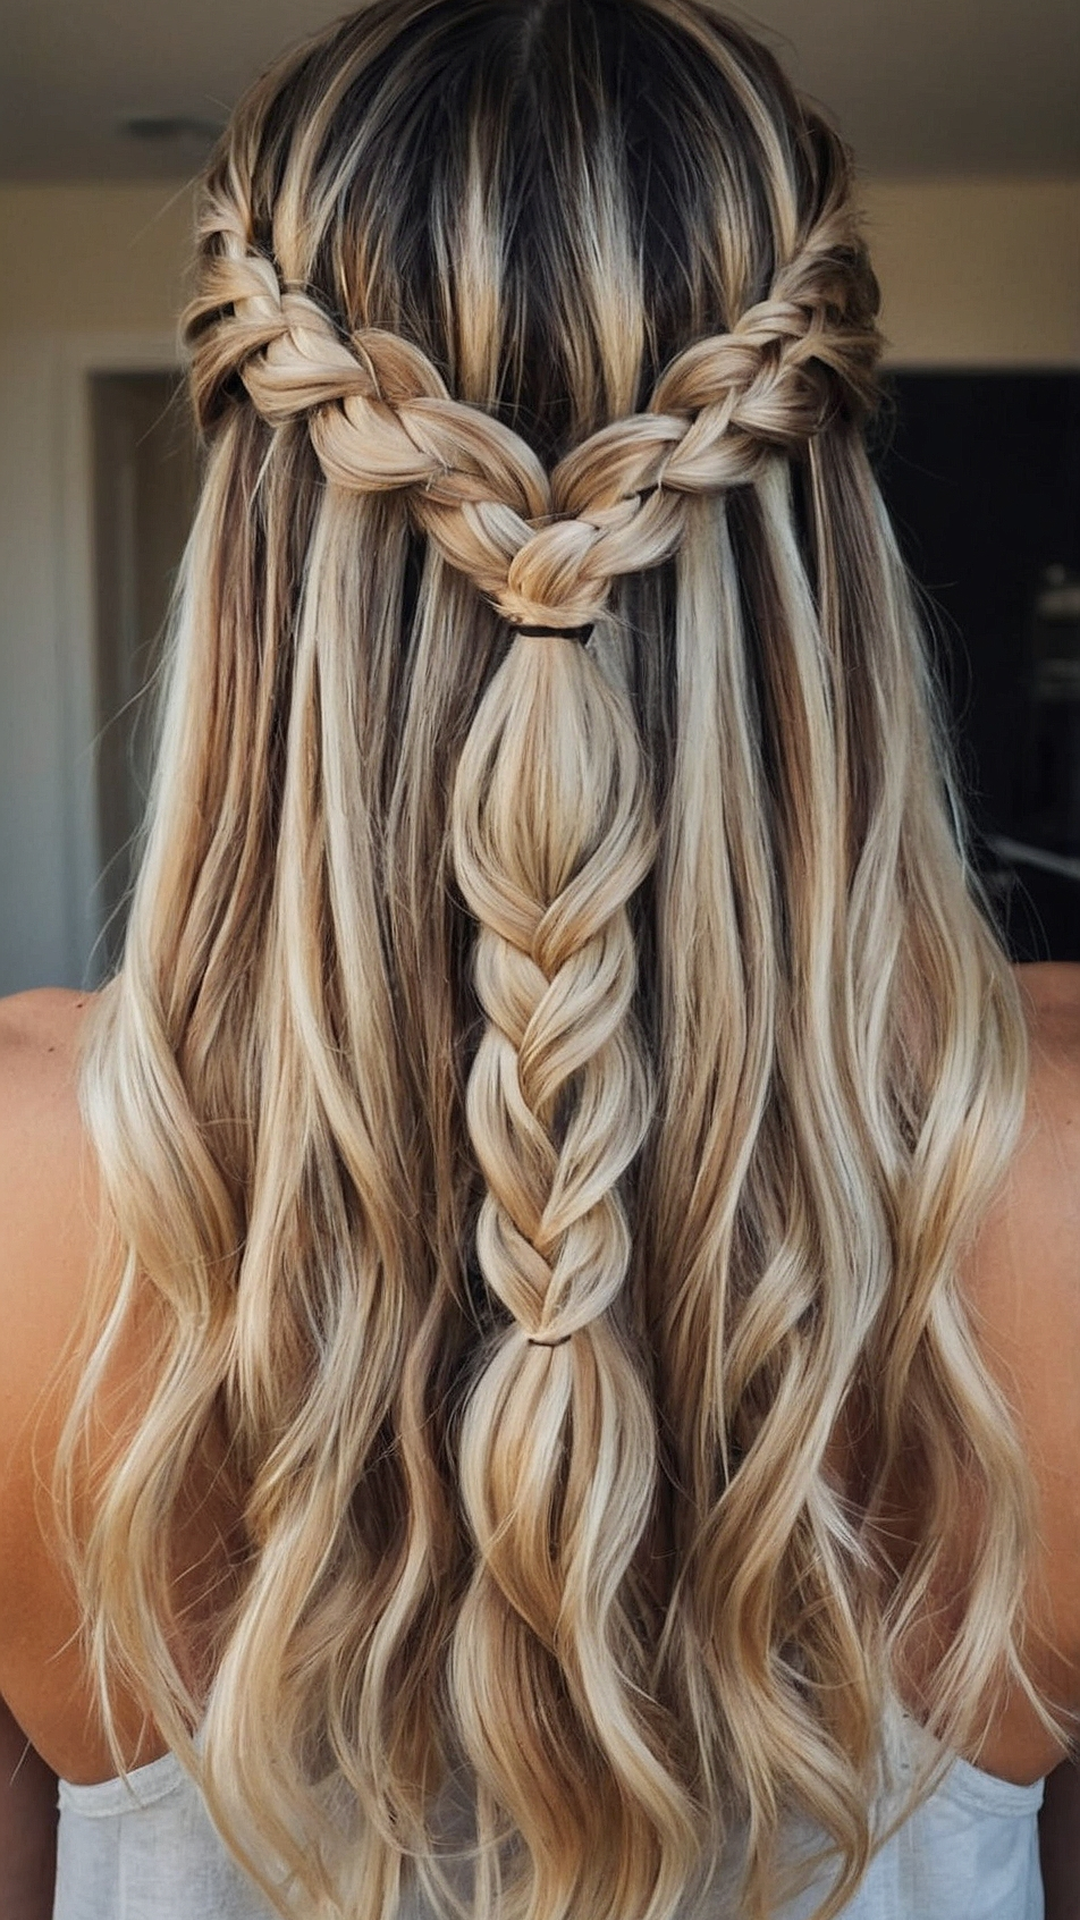 Chic and Classy: Pretty Braided Hairstyle Trends